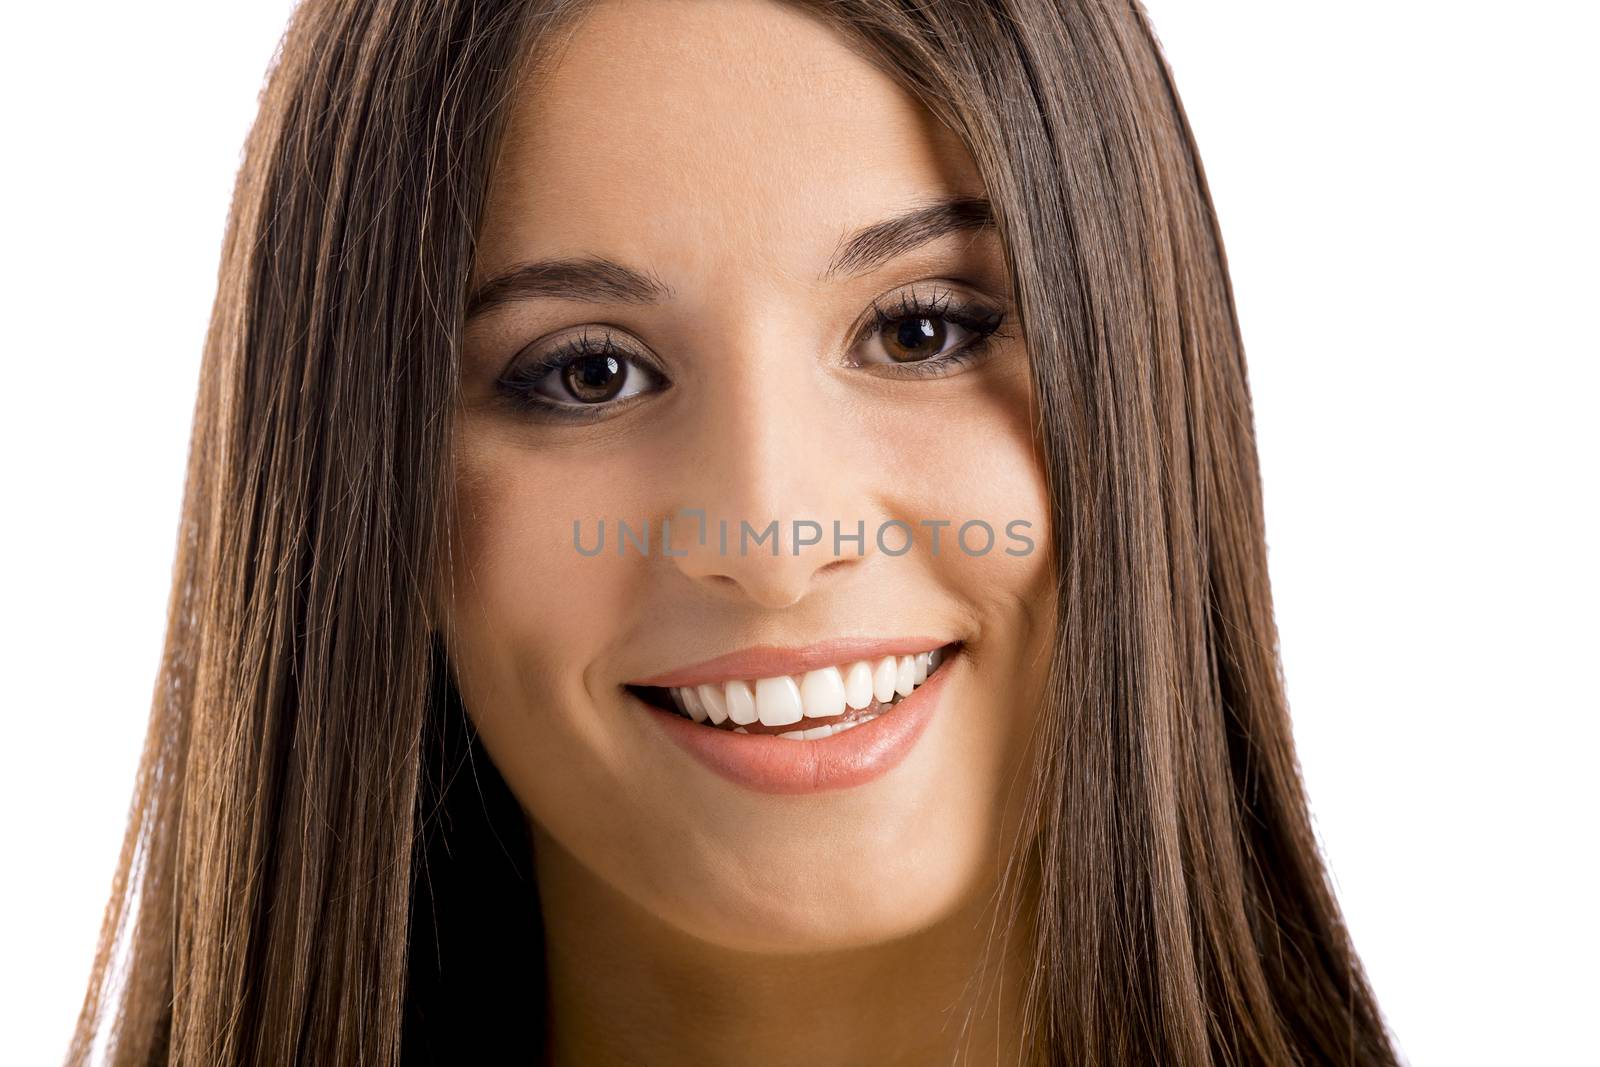 Close-up portrait of a beautiful woman smiling